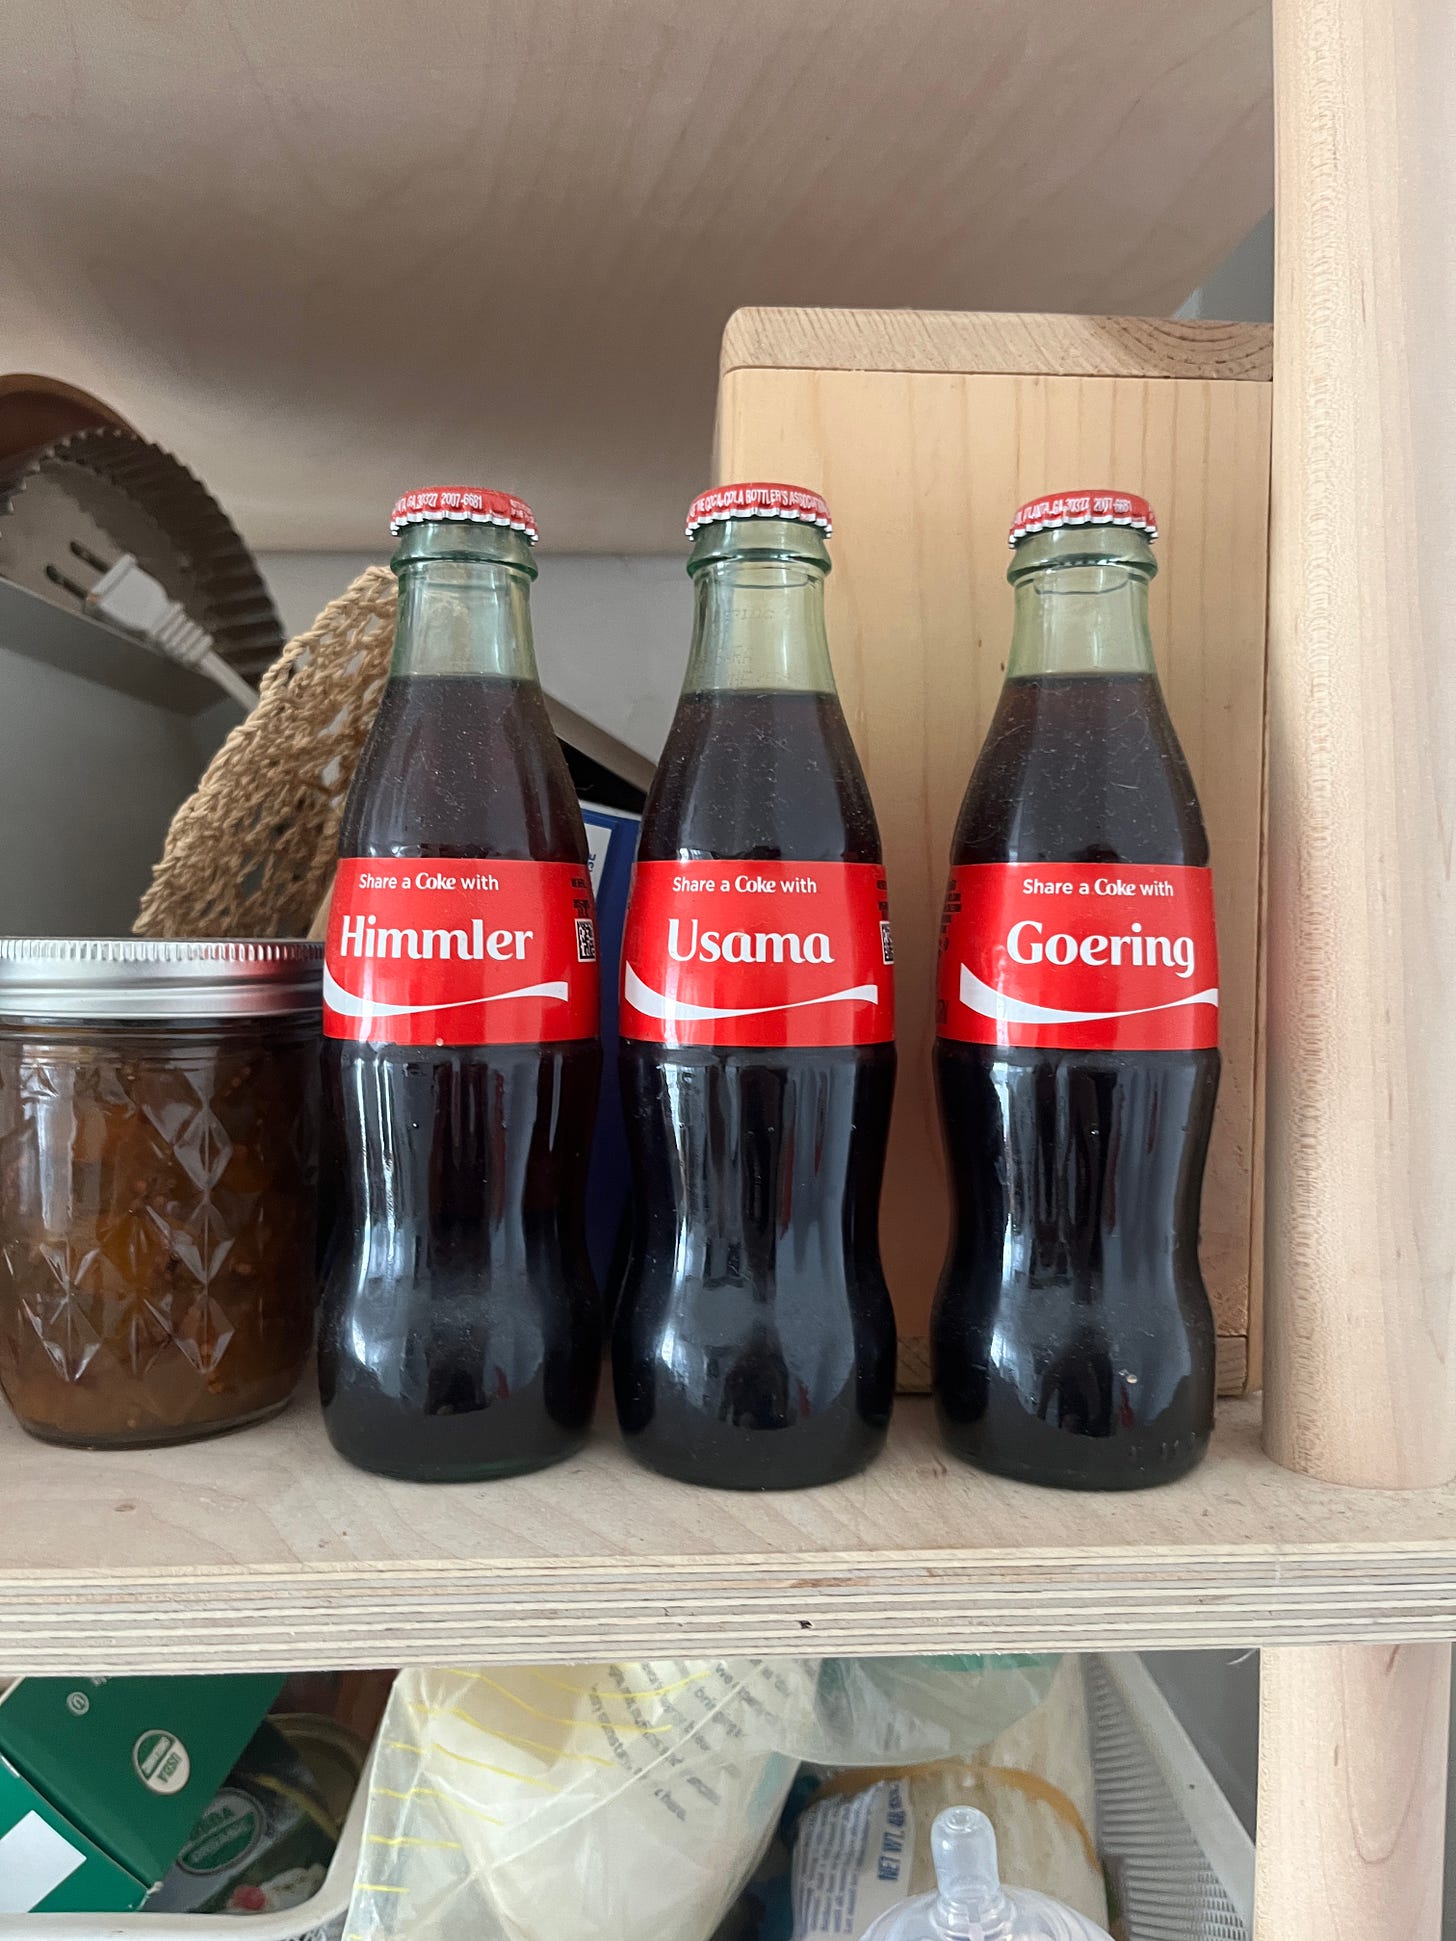 Three glass coke bottles that say "Share a Coke with..." and the names "Himmler," "Usama," and "Goering."